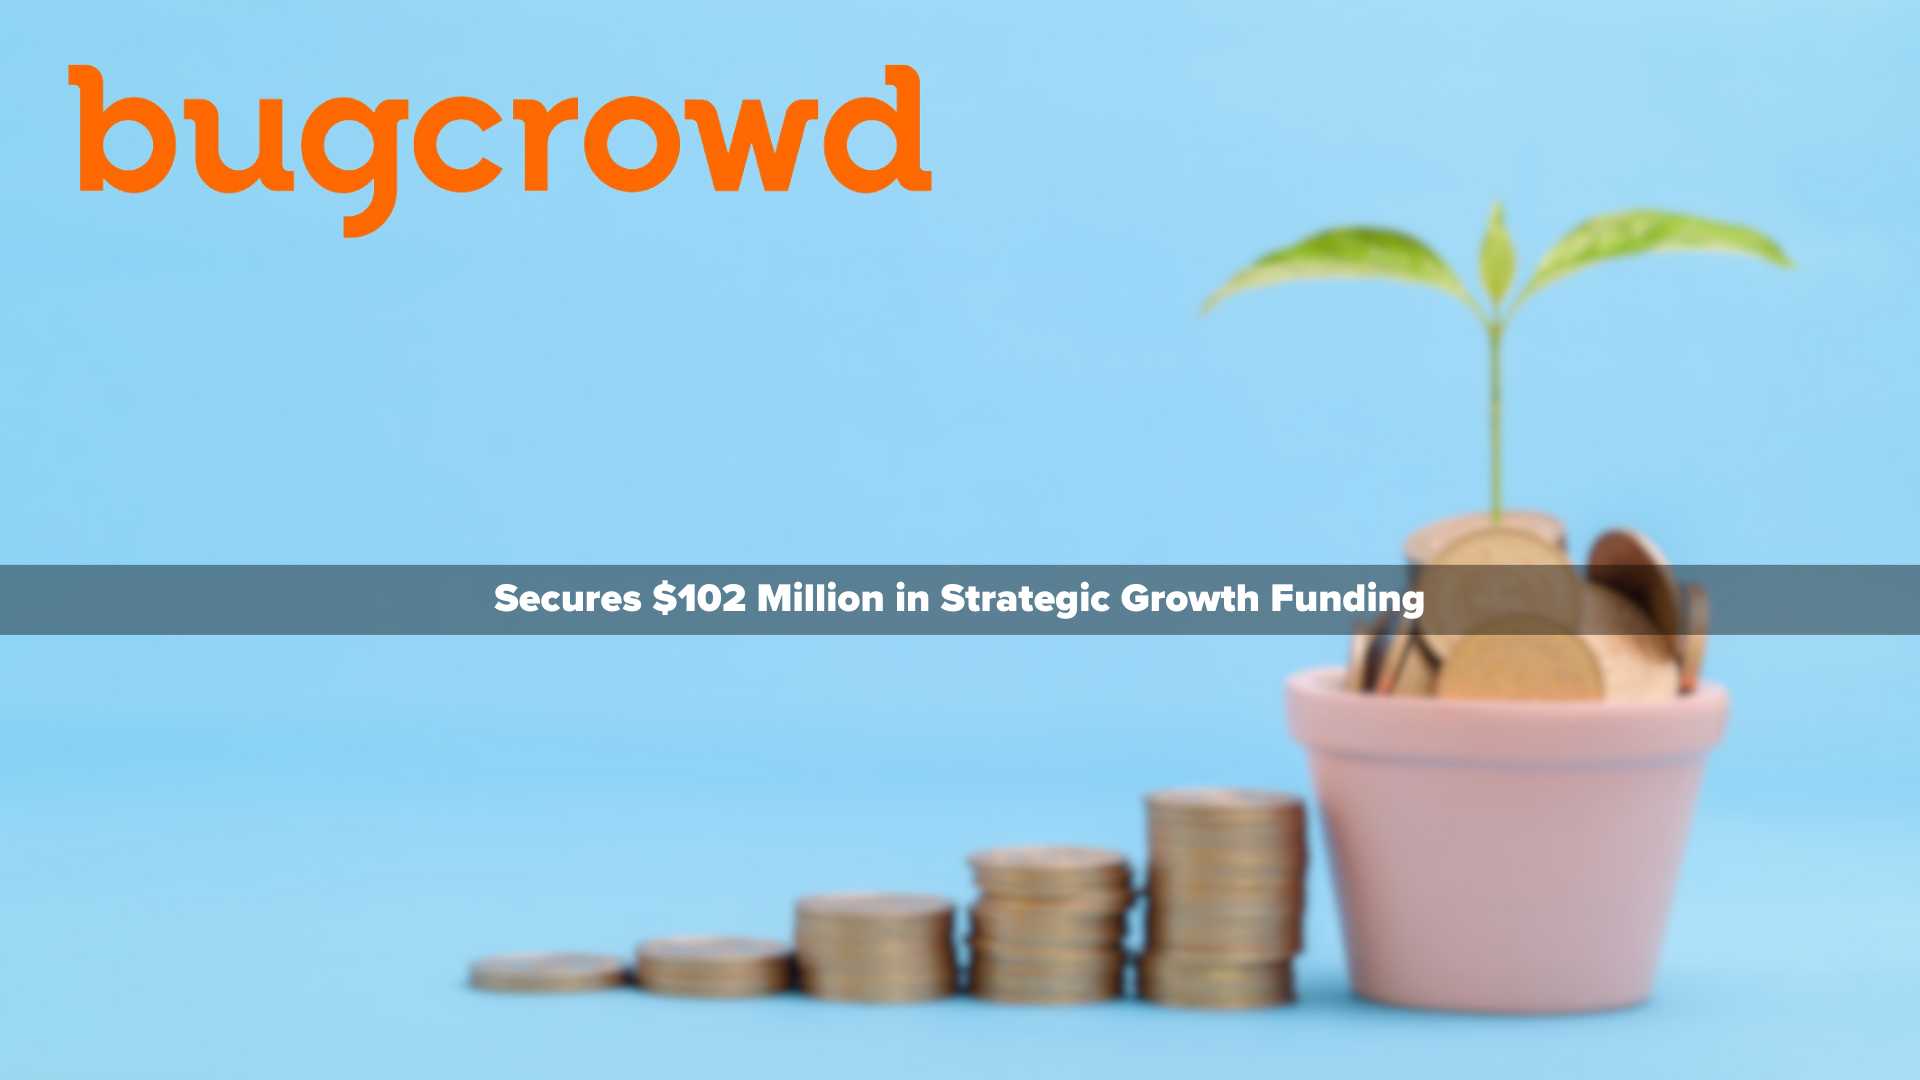 Bugcrowd Secures $102 Million in Strategic Growth Funding to Scale AI-Powered Crowdsourced Security Platform